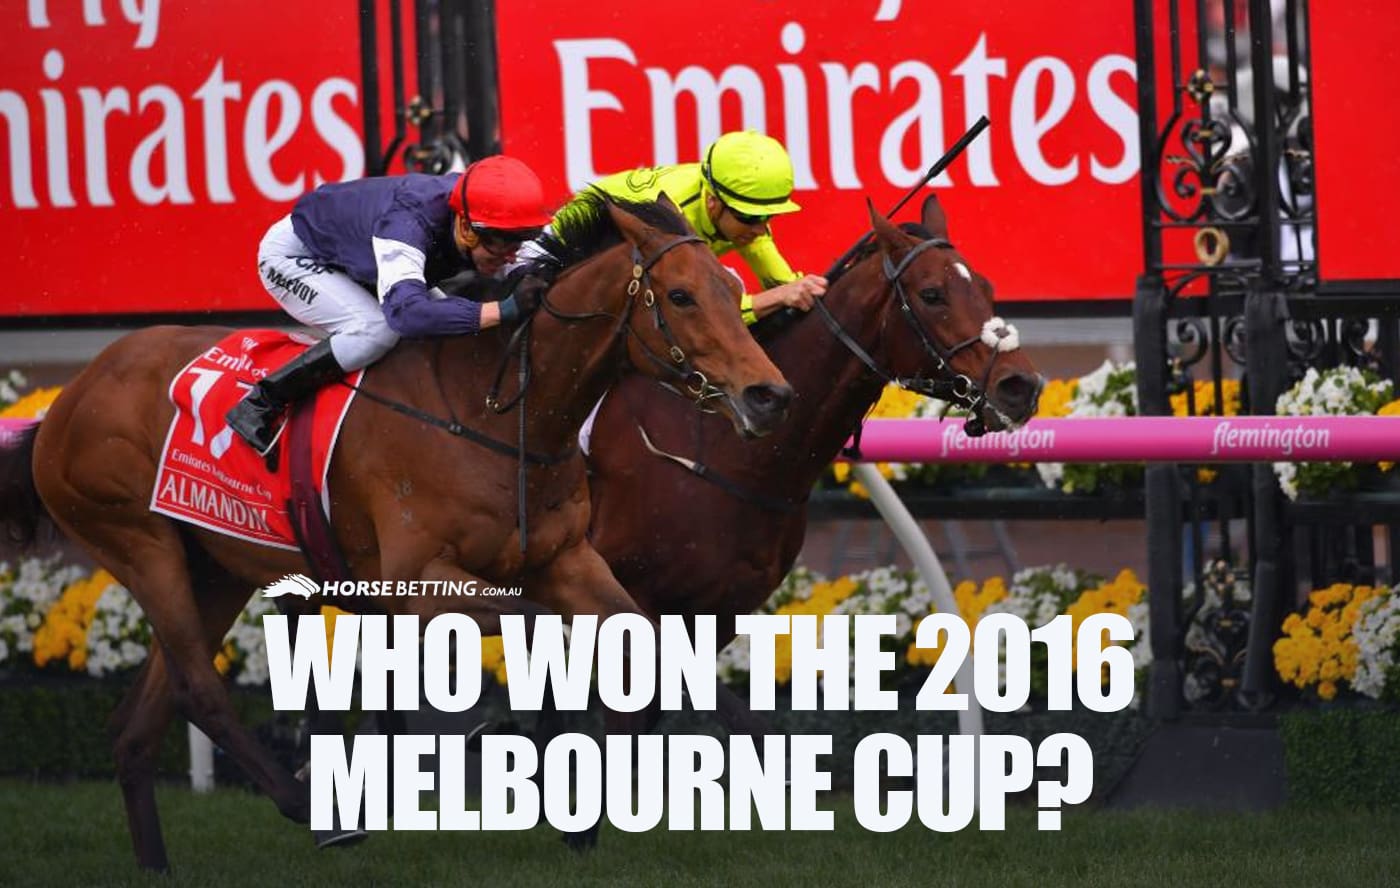 Who won the 2016 Melbourne Cup?